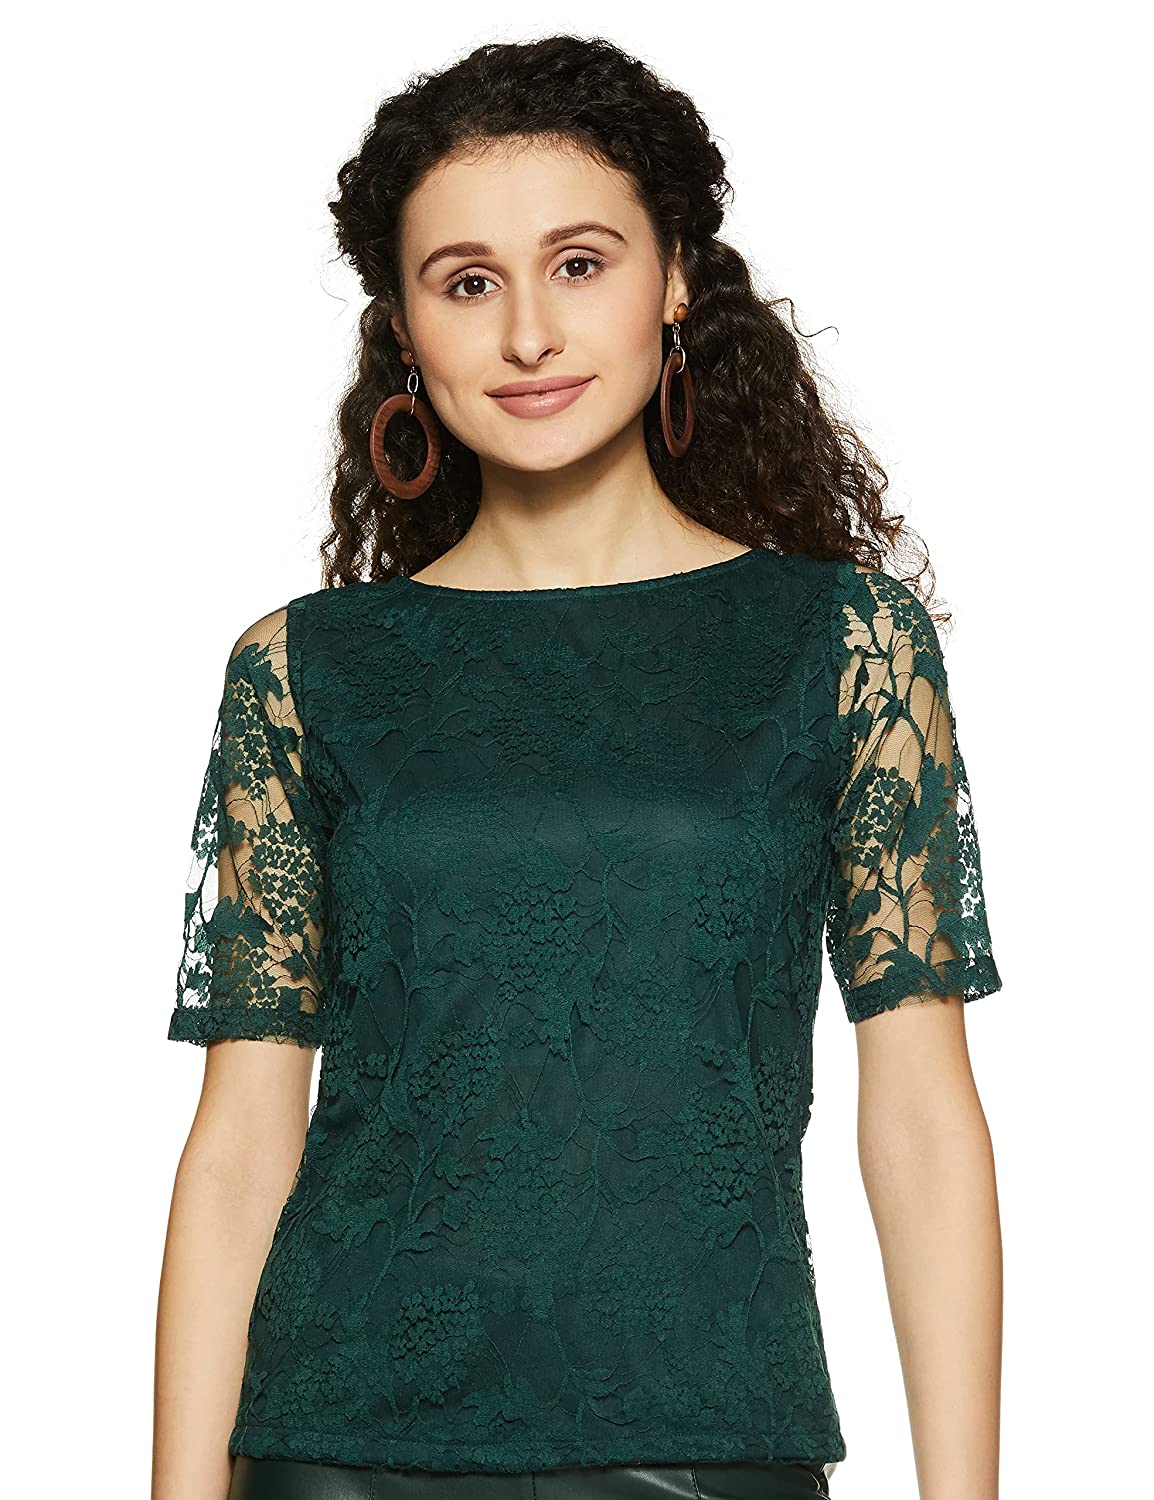 Buy Miss Olive Women's Regular Fit Lace Top